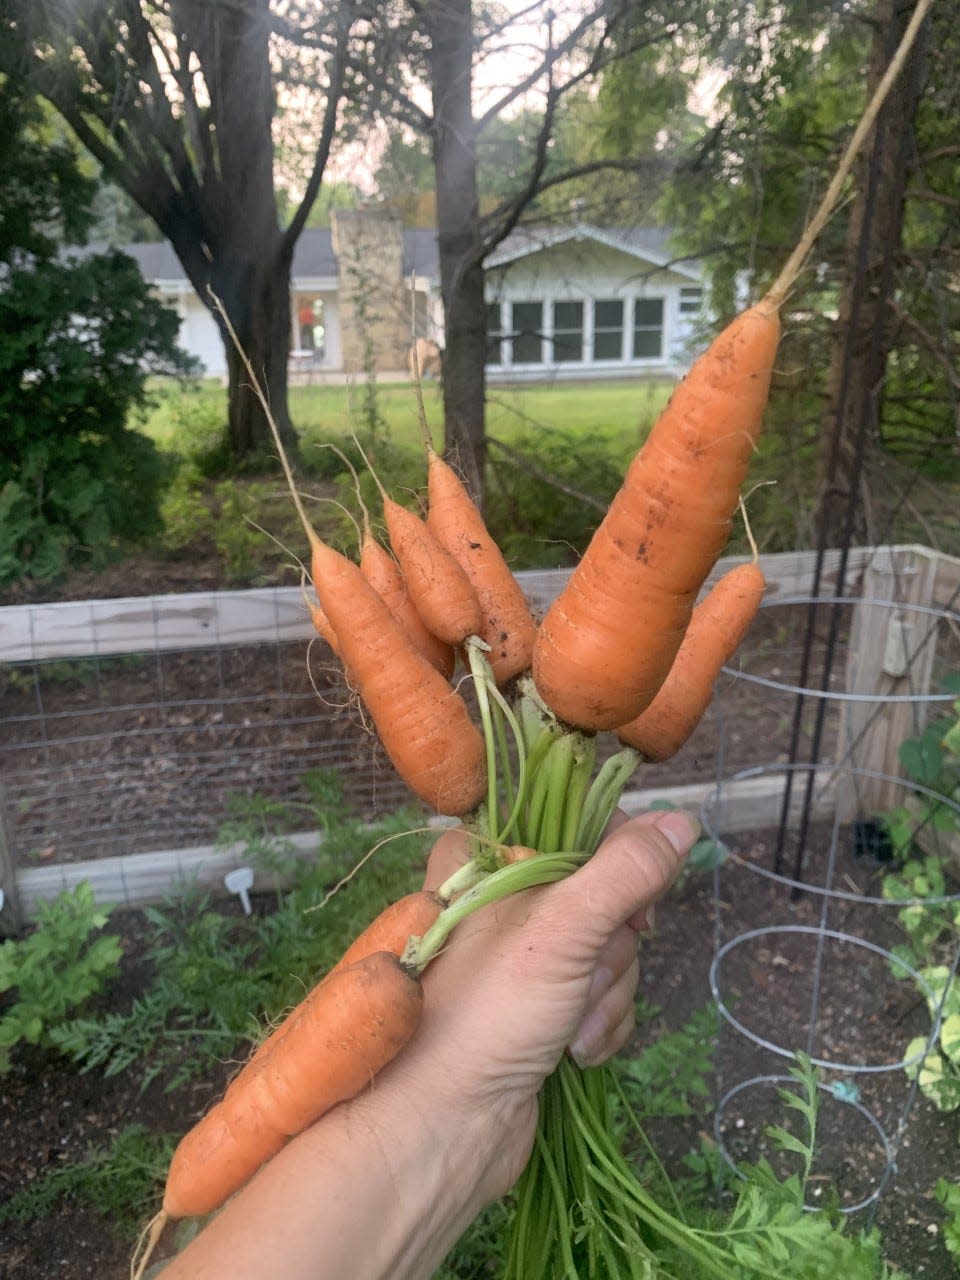 Part of reducing waste is growing your own food, says Liesel Werch. “Carrot seeds are inexpensive, and with some tended, loose soil, they’re not difficult to grow,” she said.